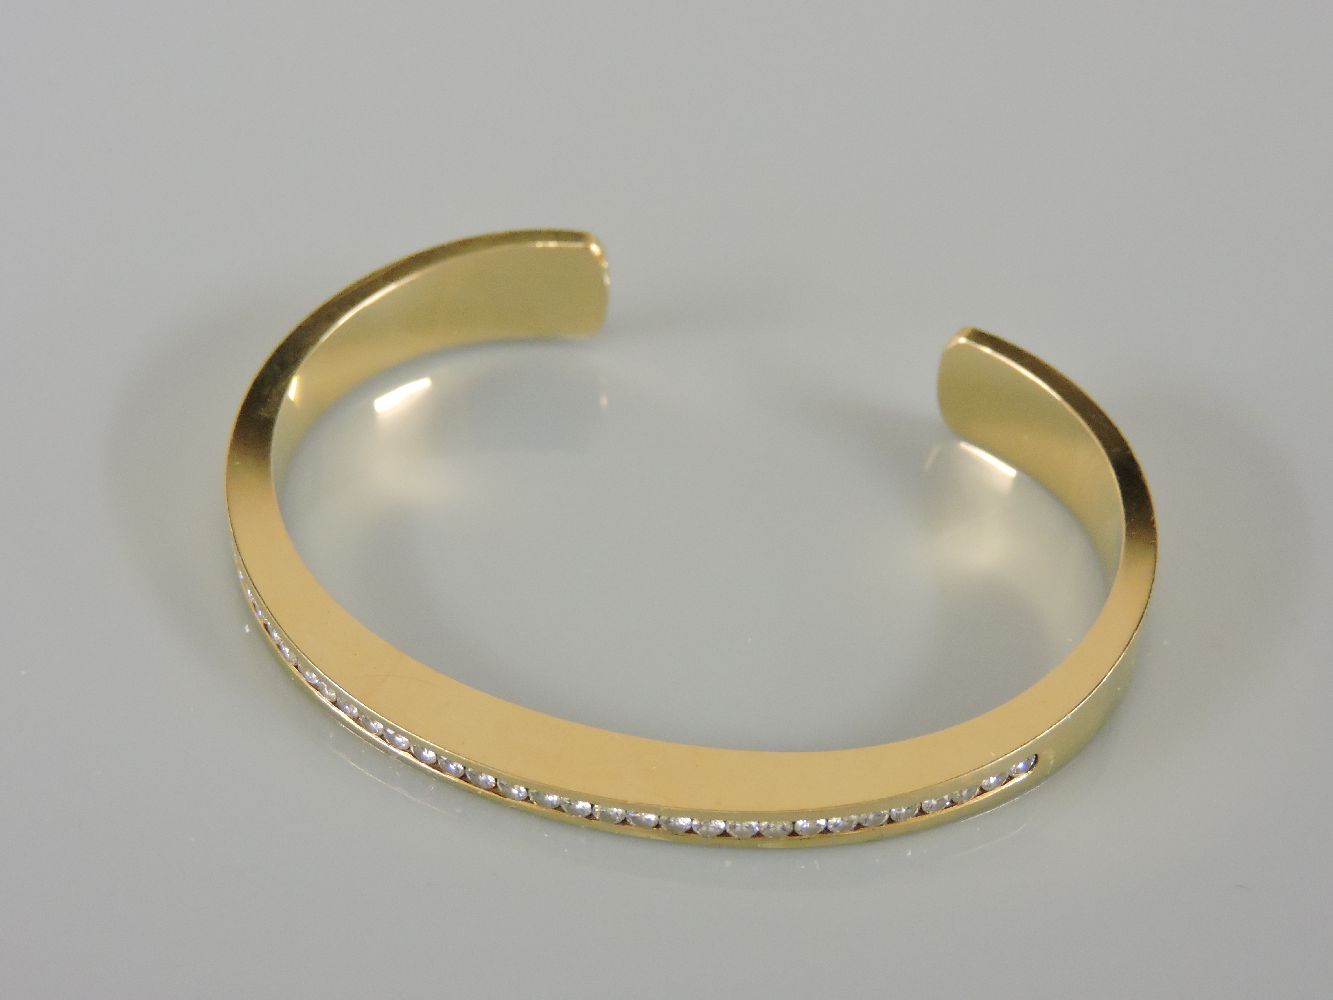 An 18ct gold diamond set torque bangle, with a row of channel set brilliant cut diamonds, believed